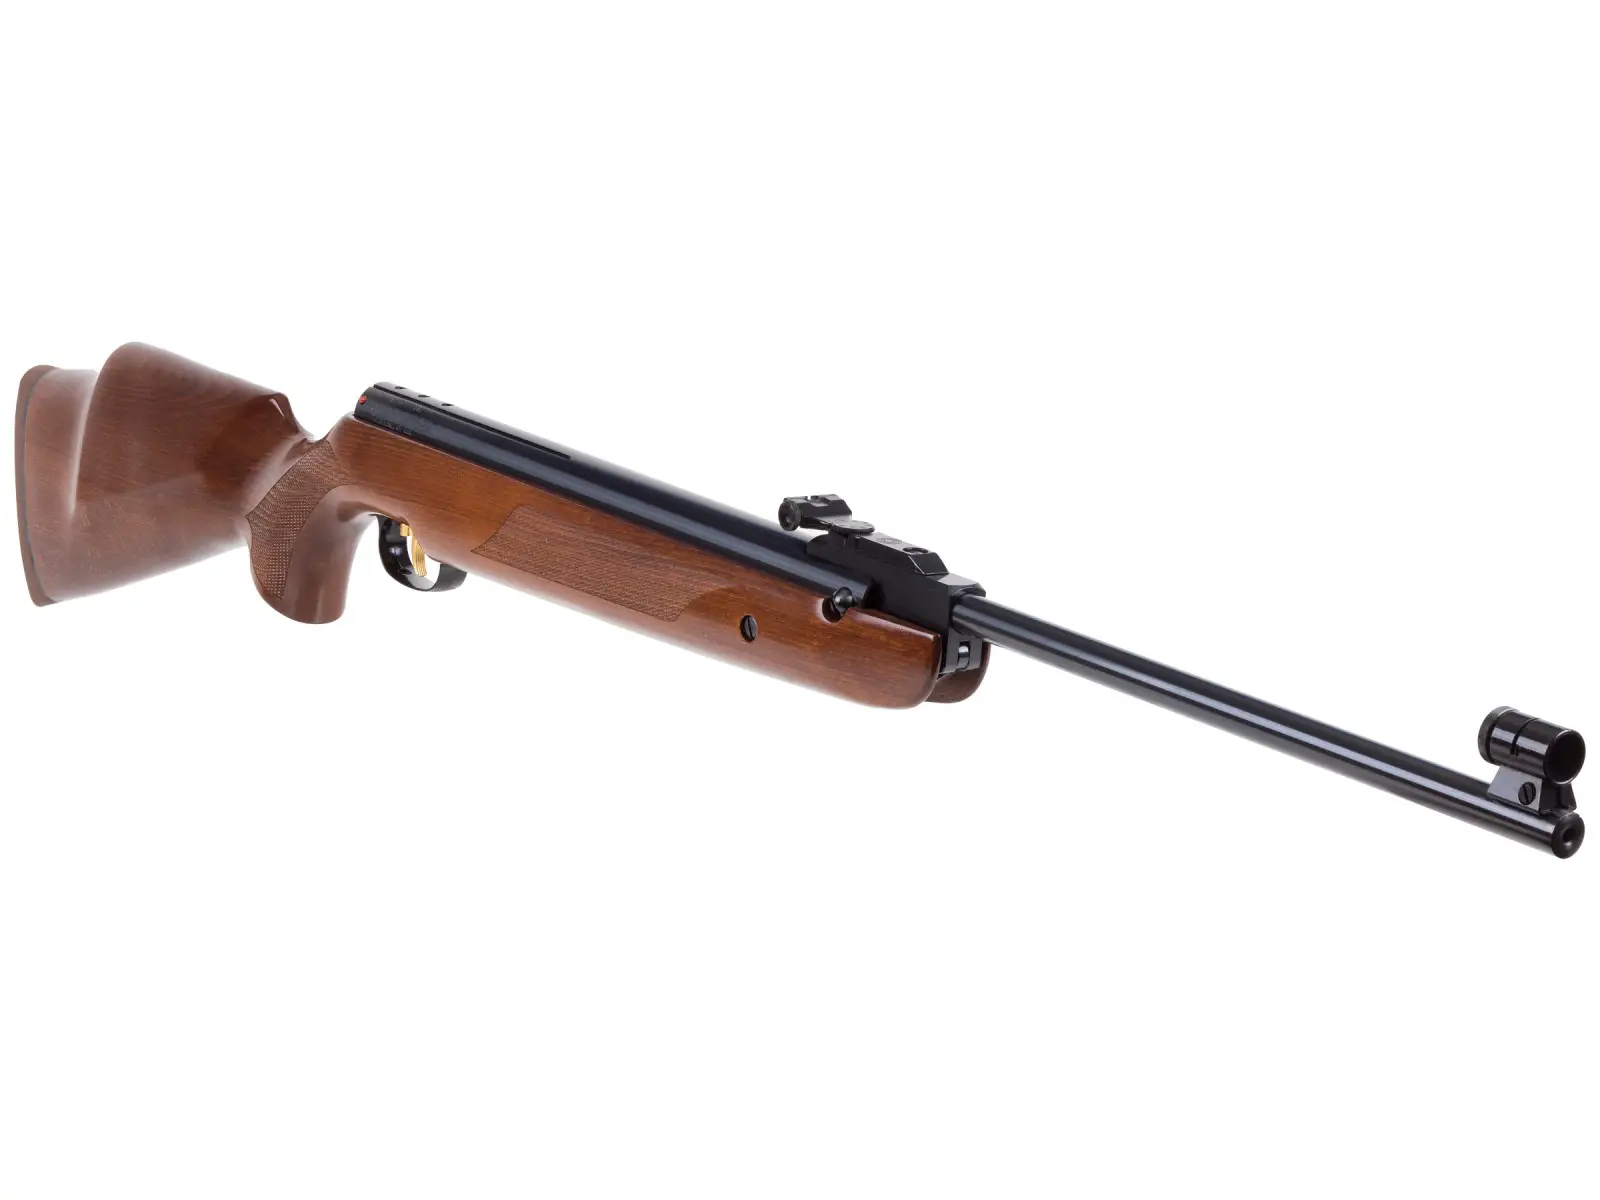 r9 Best Spring Air Rifles - Top 7 Springers for the money (Reviews & Buying Guides 2022)